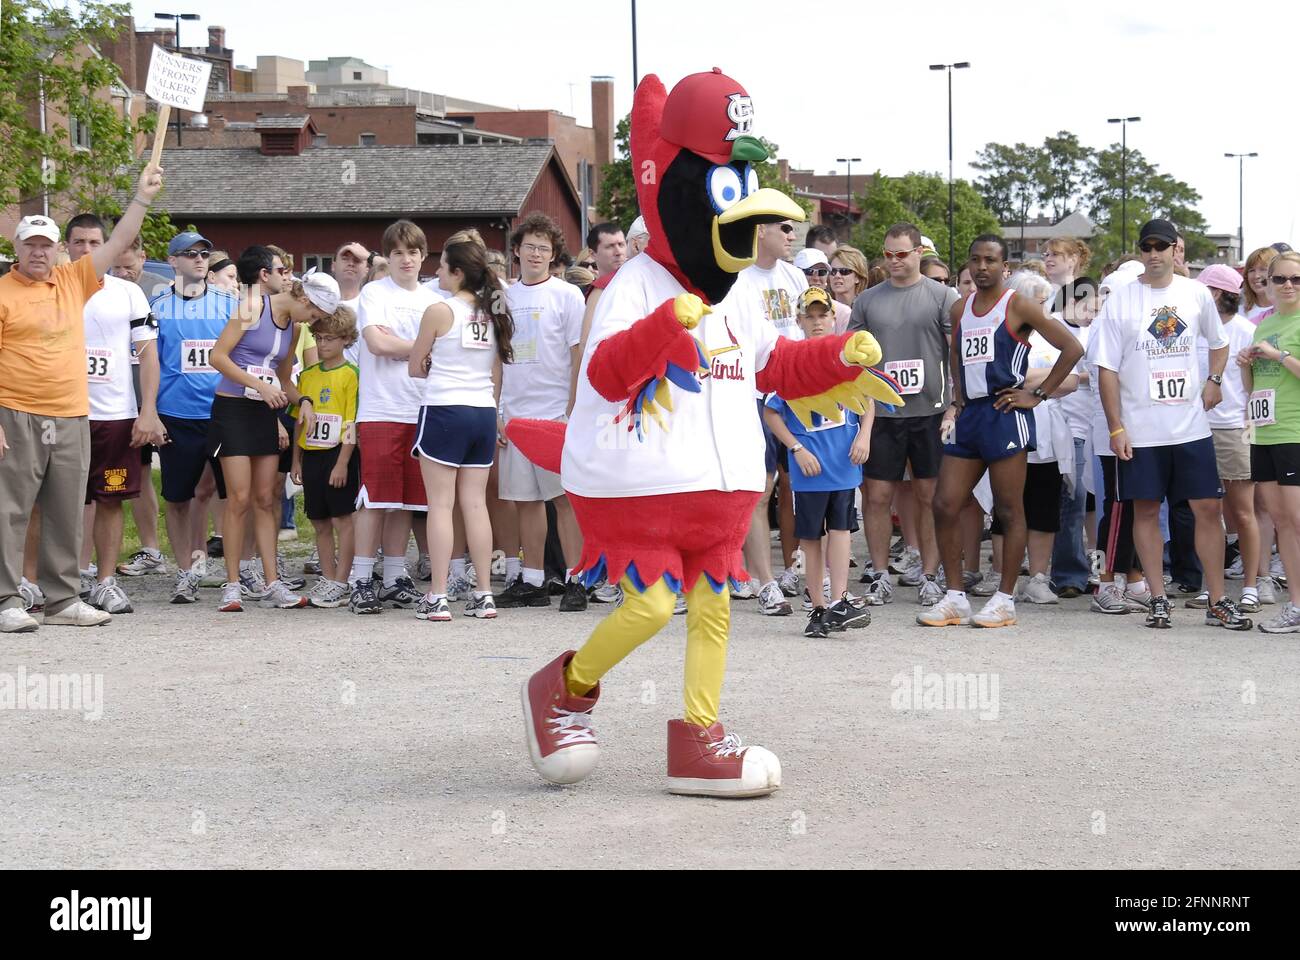 ST. CHARLES, UNITED STATES - May 10, 2009: Fred Bird, the mascot for the St. Louis Cardinals baseball team having some fun with the crowd at a charity Stock Photo